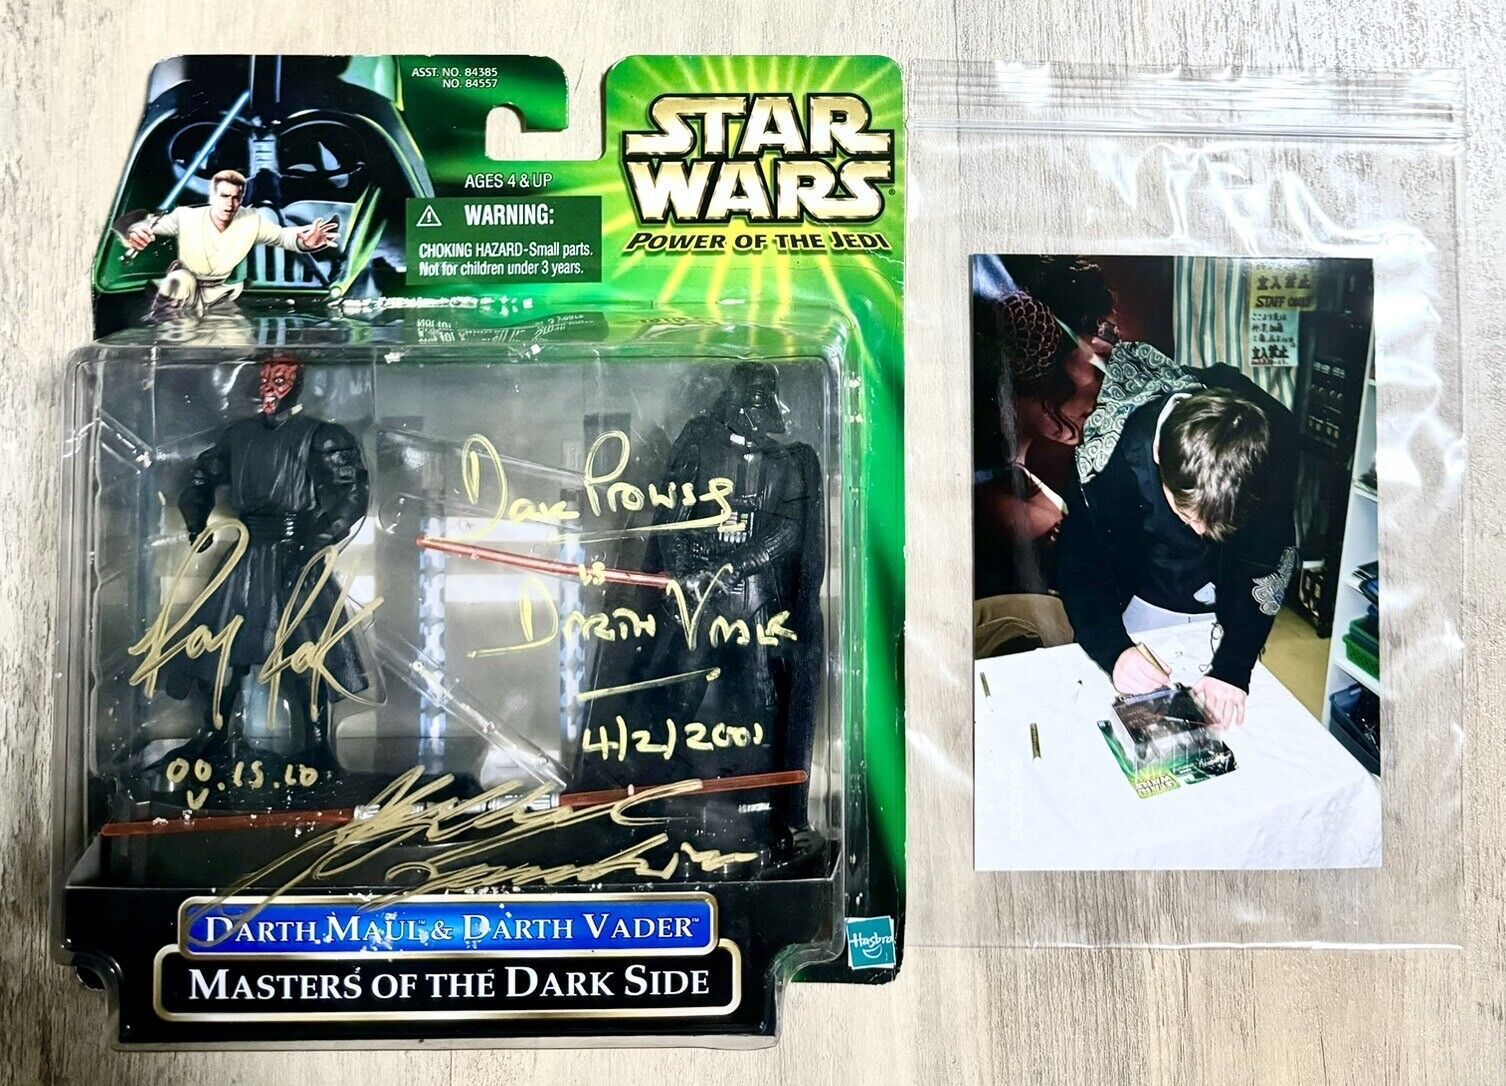 Rare Triple-Signed Star Wars Figure With Photo - Holy Grail Collectible